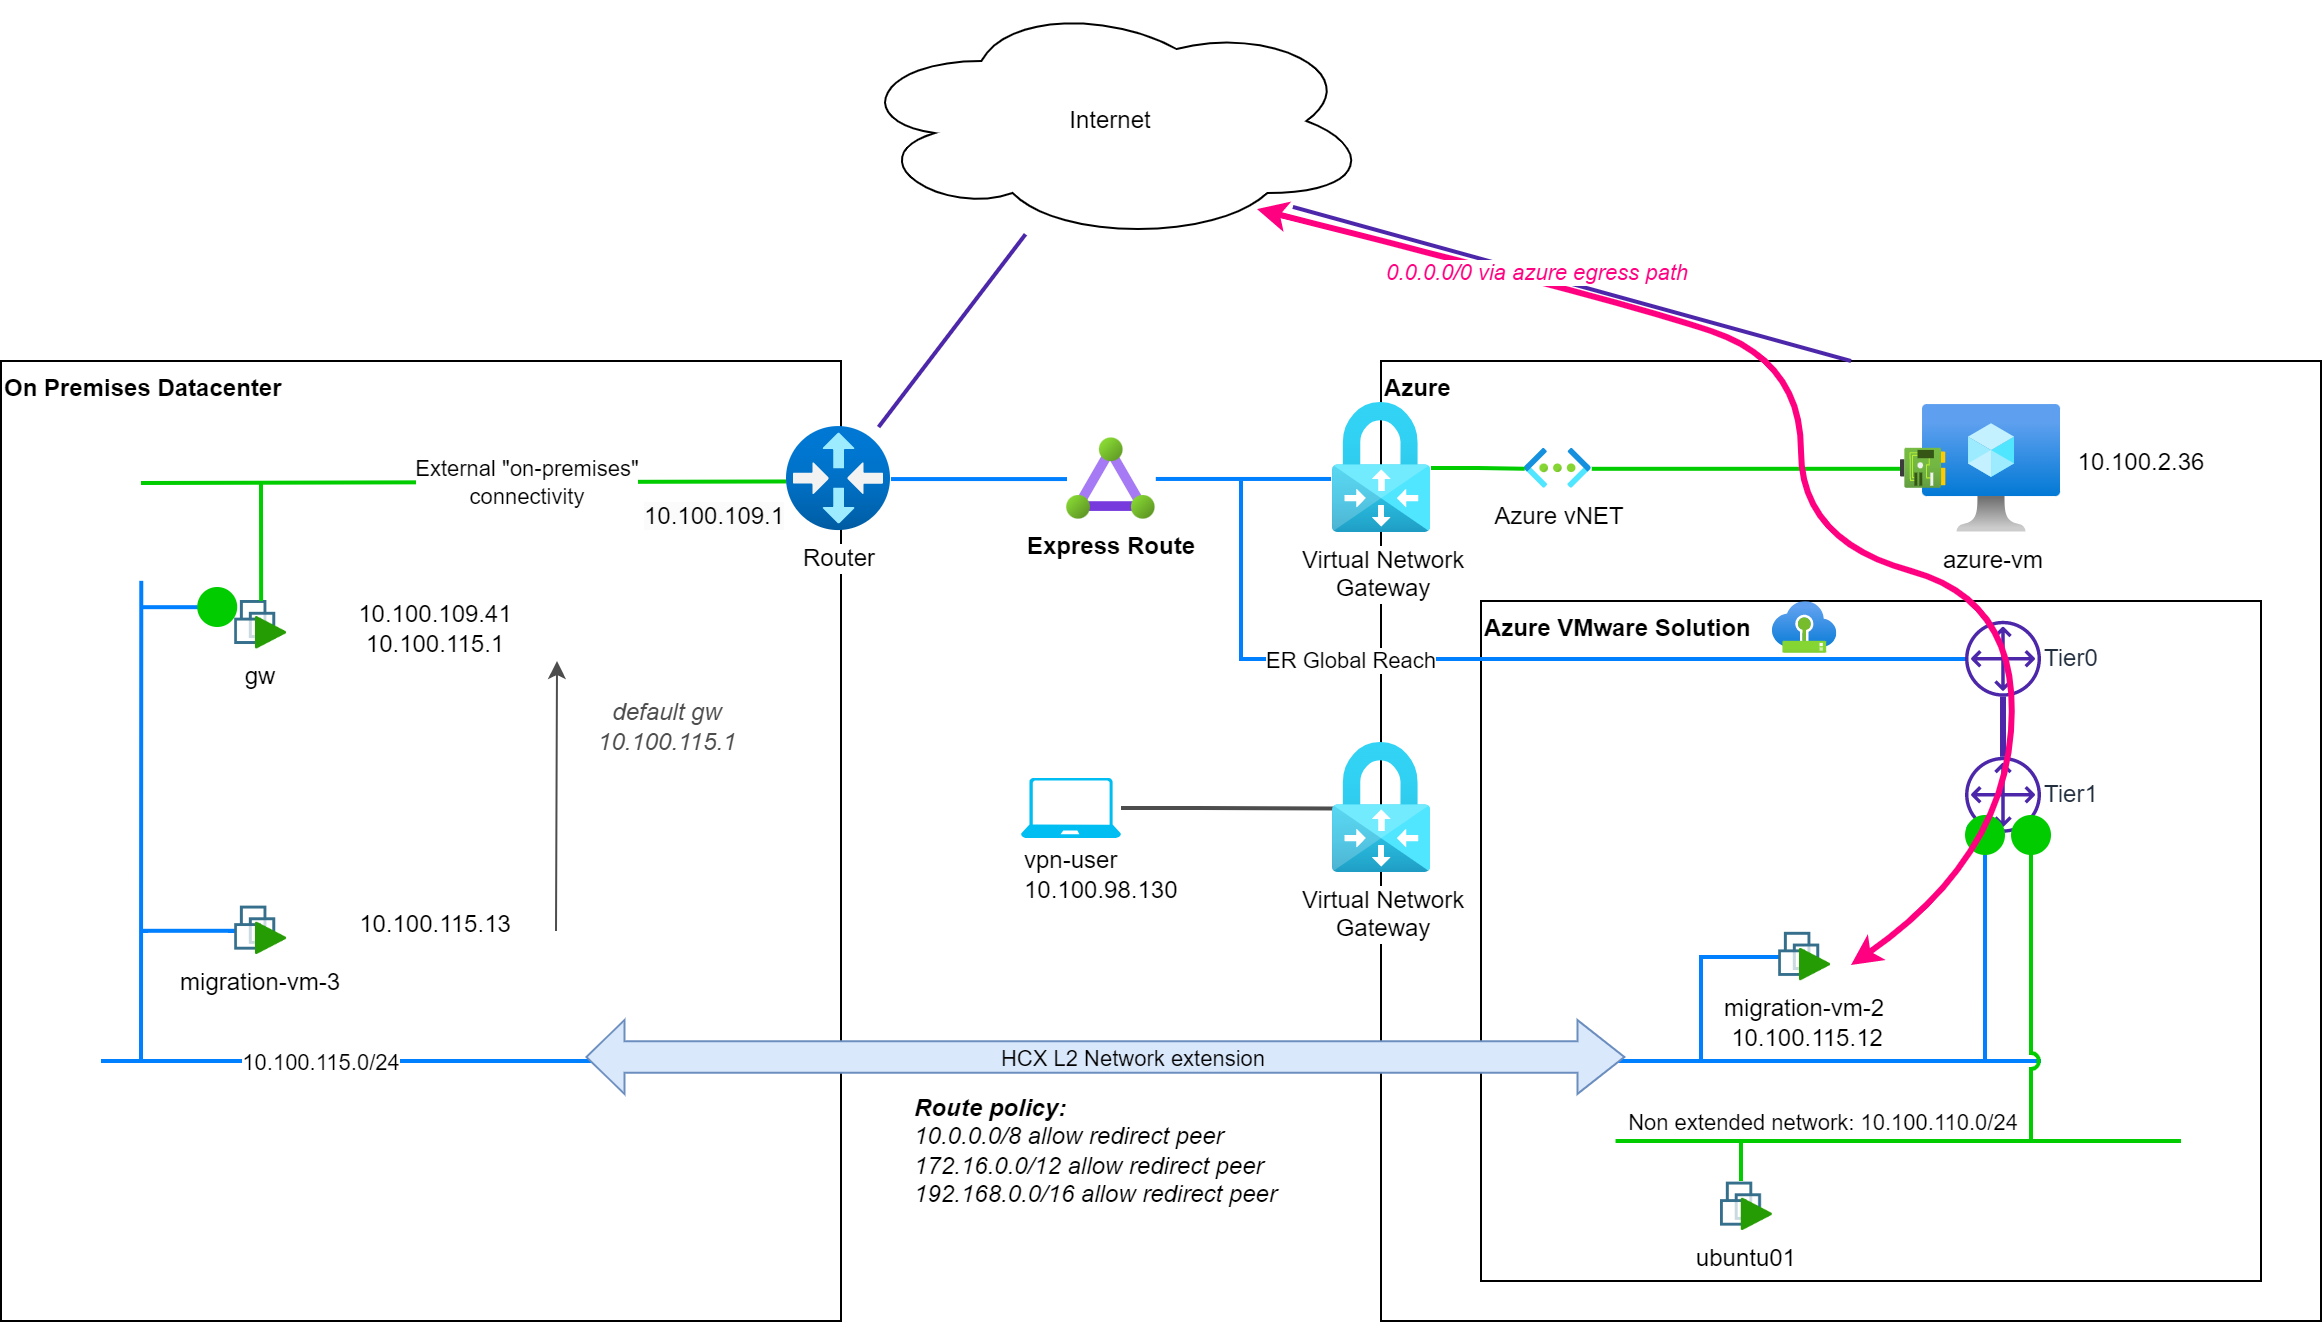 Network path to reach Internet with default policy routes and router-location set to cloud side gateway